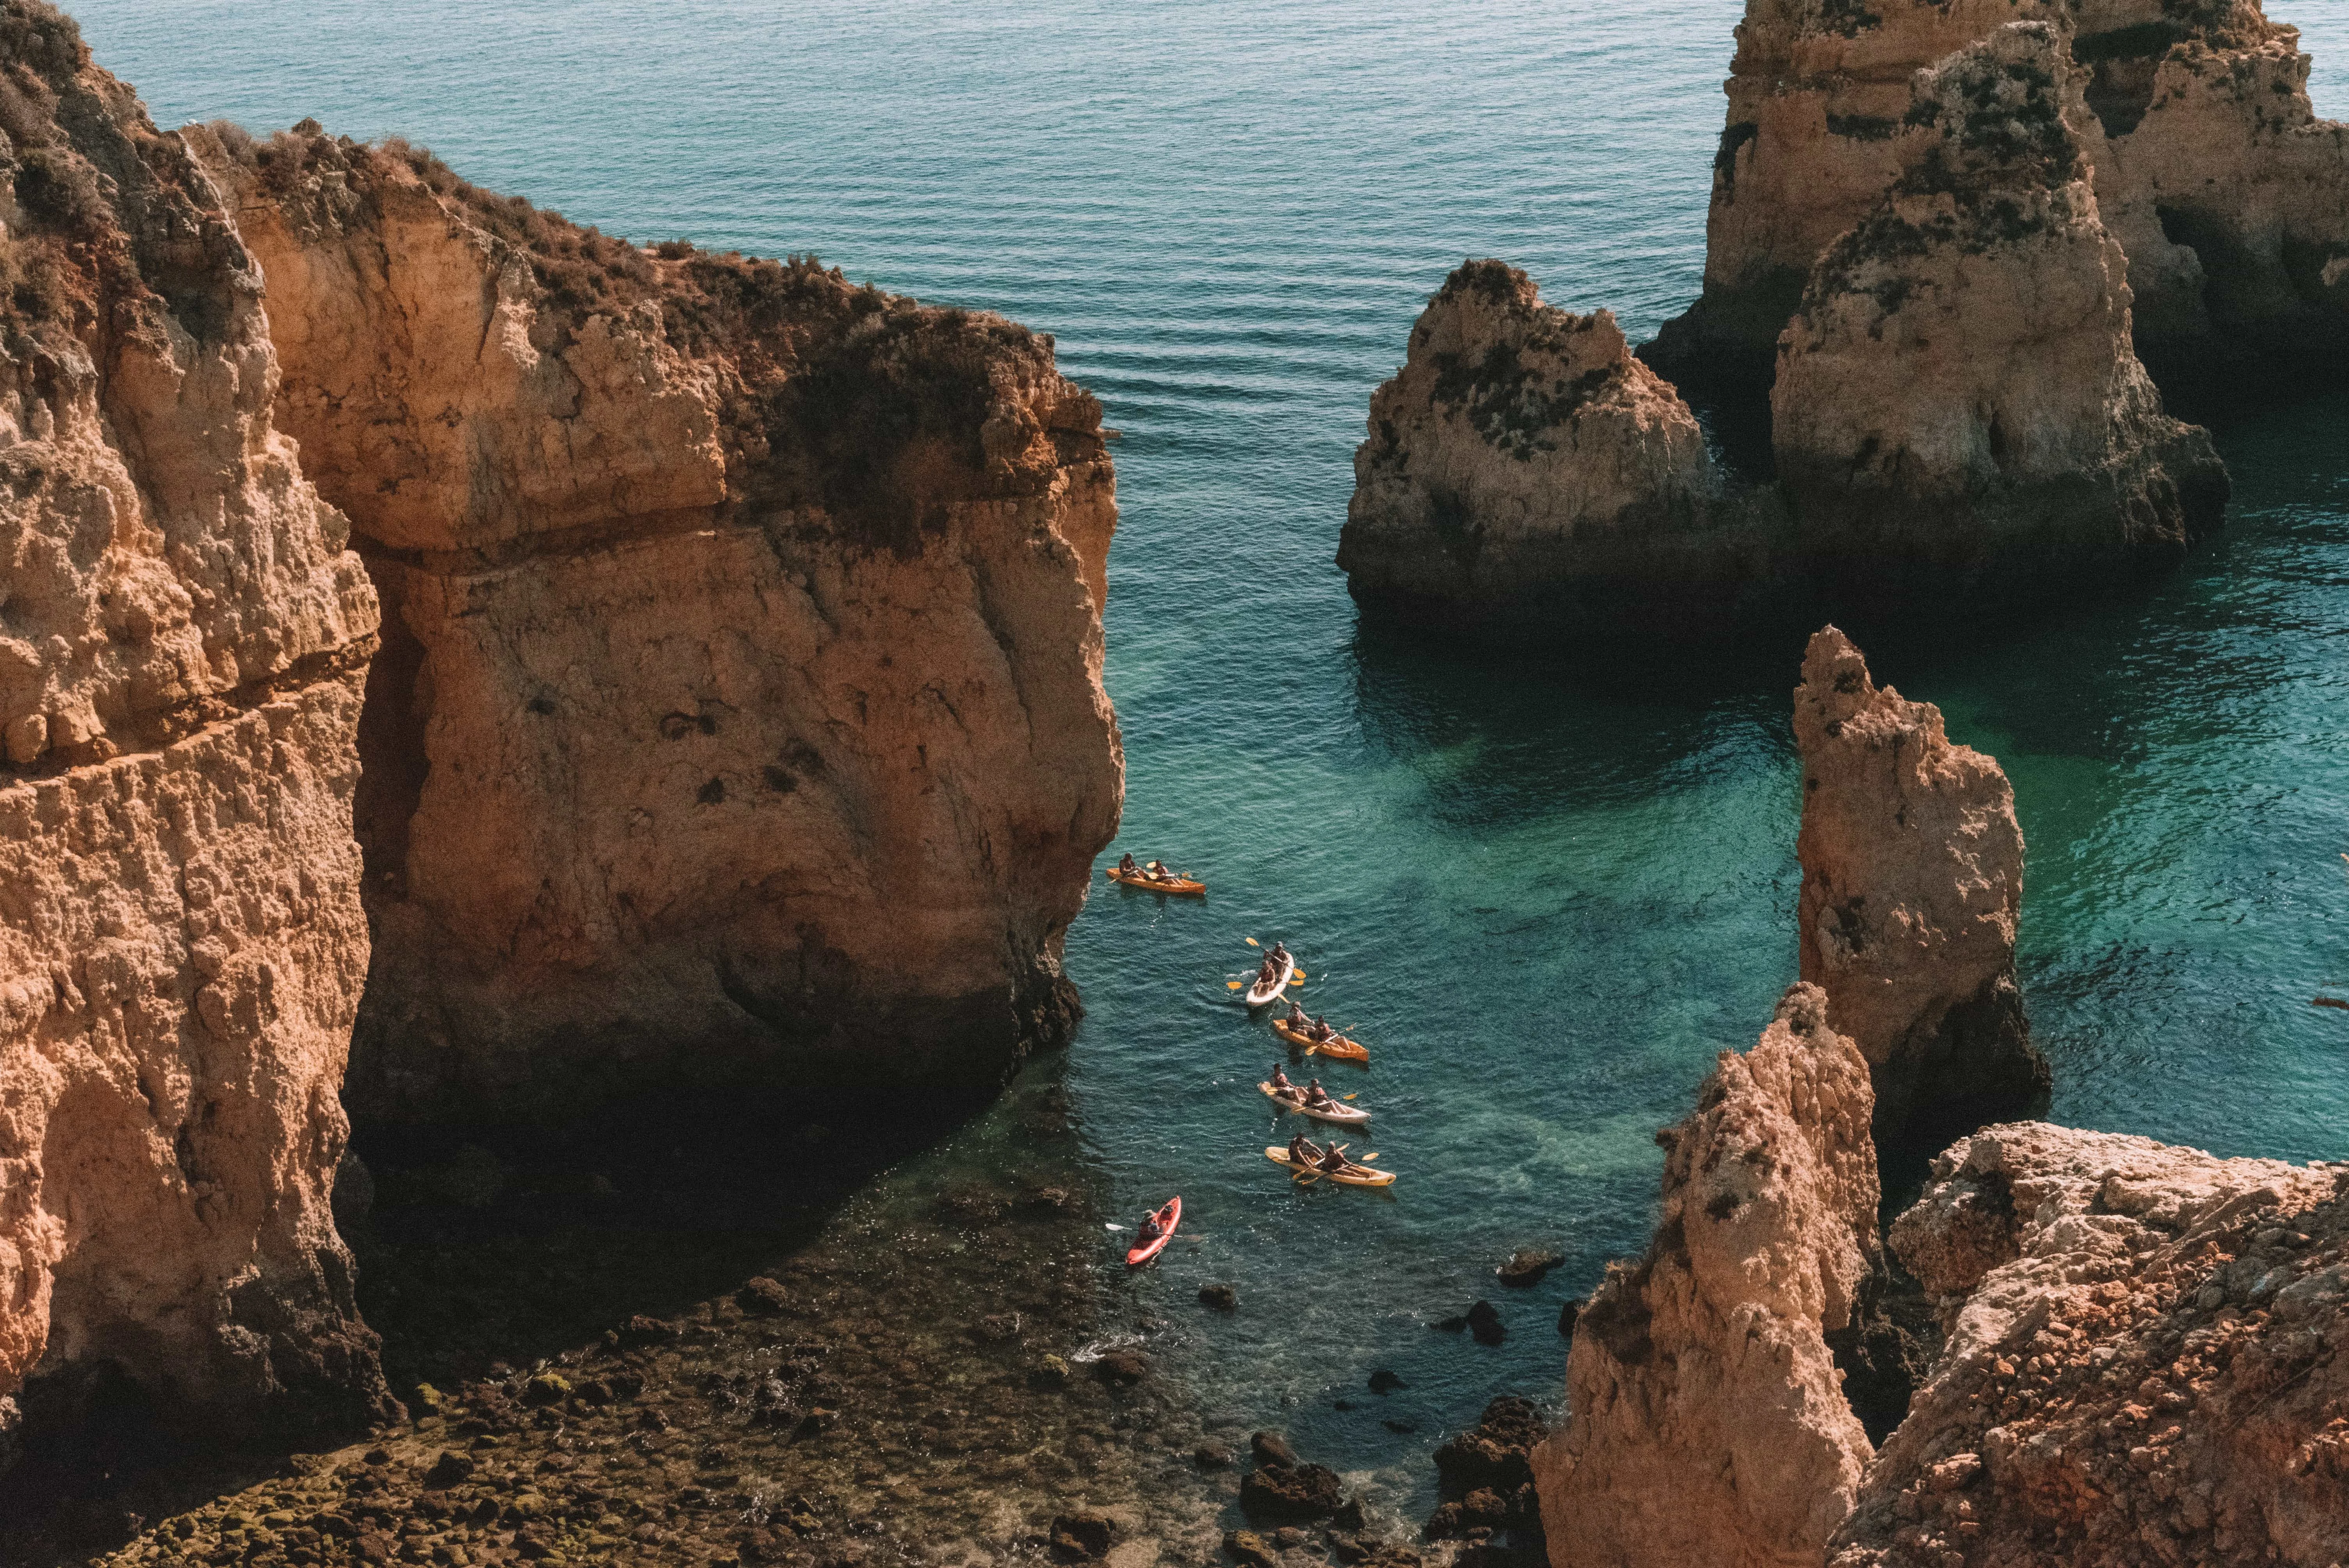 things to do in Algarve, places to visit in Algarve, festivals in Algarve, best time to visit Algarve, daily budget in Algarve, food to try in Algarve, how to get to Algarve, road trip Algarve, beaches to visit in algarve